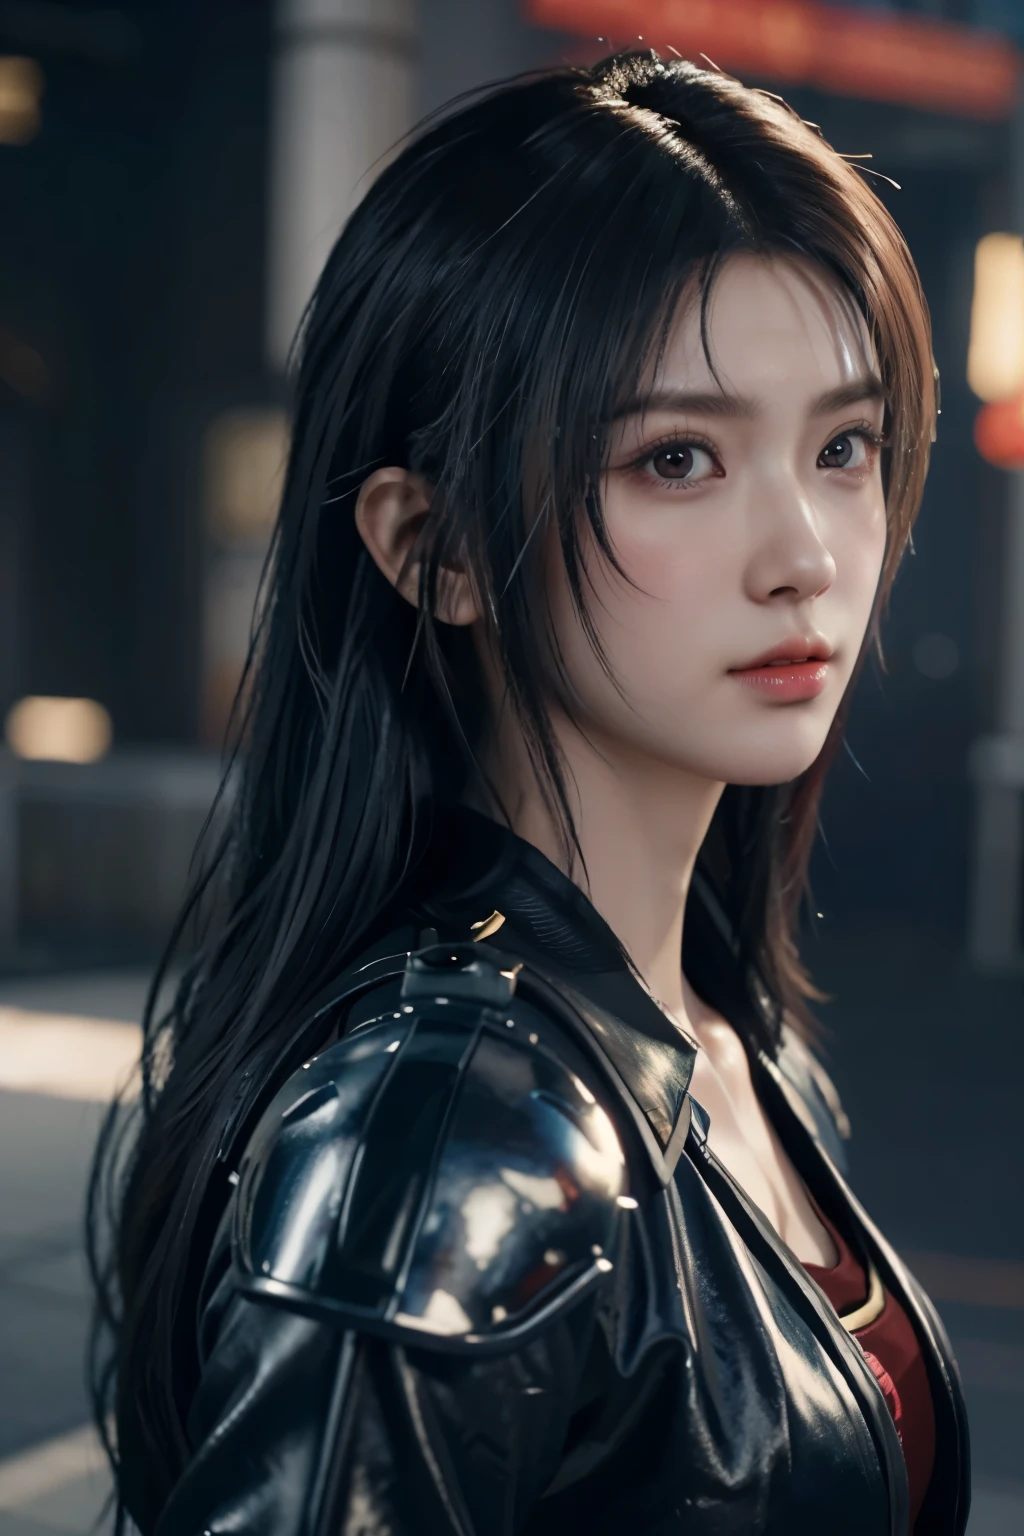 Game art，The best picture quality，Highest resolution，8K，(A bust photograph)，(Portrait)，(Head close-up)，(Rule of thirds)，Unreal Engine 5 rendering works， (The Girl of the Future)，(Female Warrior)， 22-year-old girl，(Female hackers)，(Rainbow hair，Ancient Oriental hairstyle)，((The pupils of the red eyes:1.3))，(A beautiful eye full of detail)，(Big breasts)，(Eye shadow)，Elegant and charming，indifferent，((Anger))，(Cyberpunk jacket full of futuristic look，Joint Armor，There are exquisite Chinese patterns on the clothes，A flash of jewellery)，Cyberpunk Characters，Future Style， Photo poses，City background，Movie lights，Ray tracing，Game CG，((3D Unreal Engine))，oc rendering reflection pattern